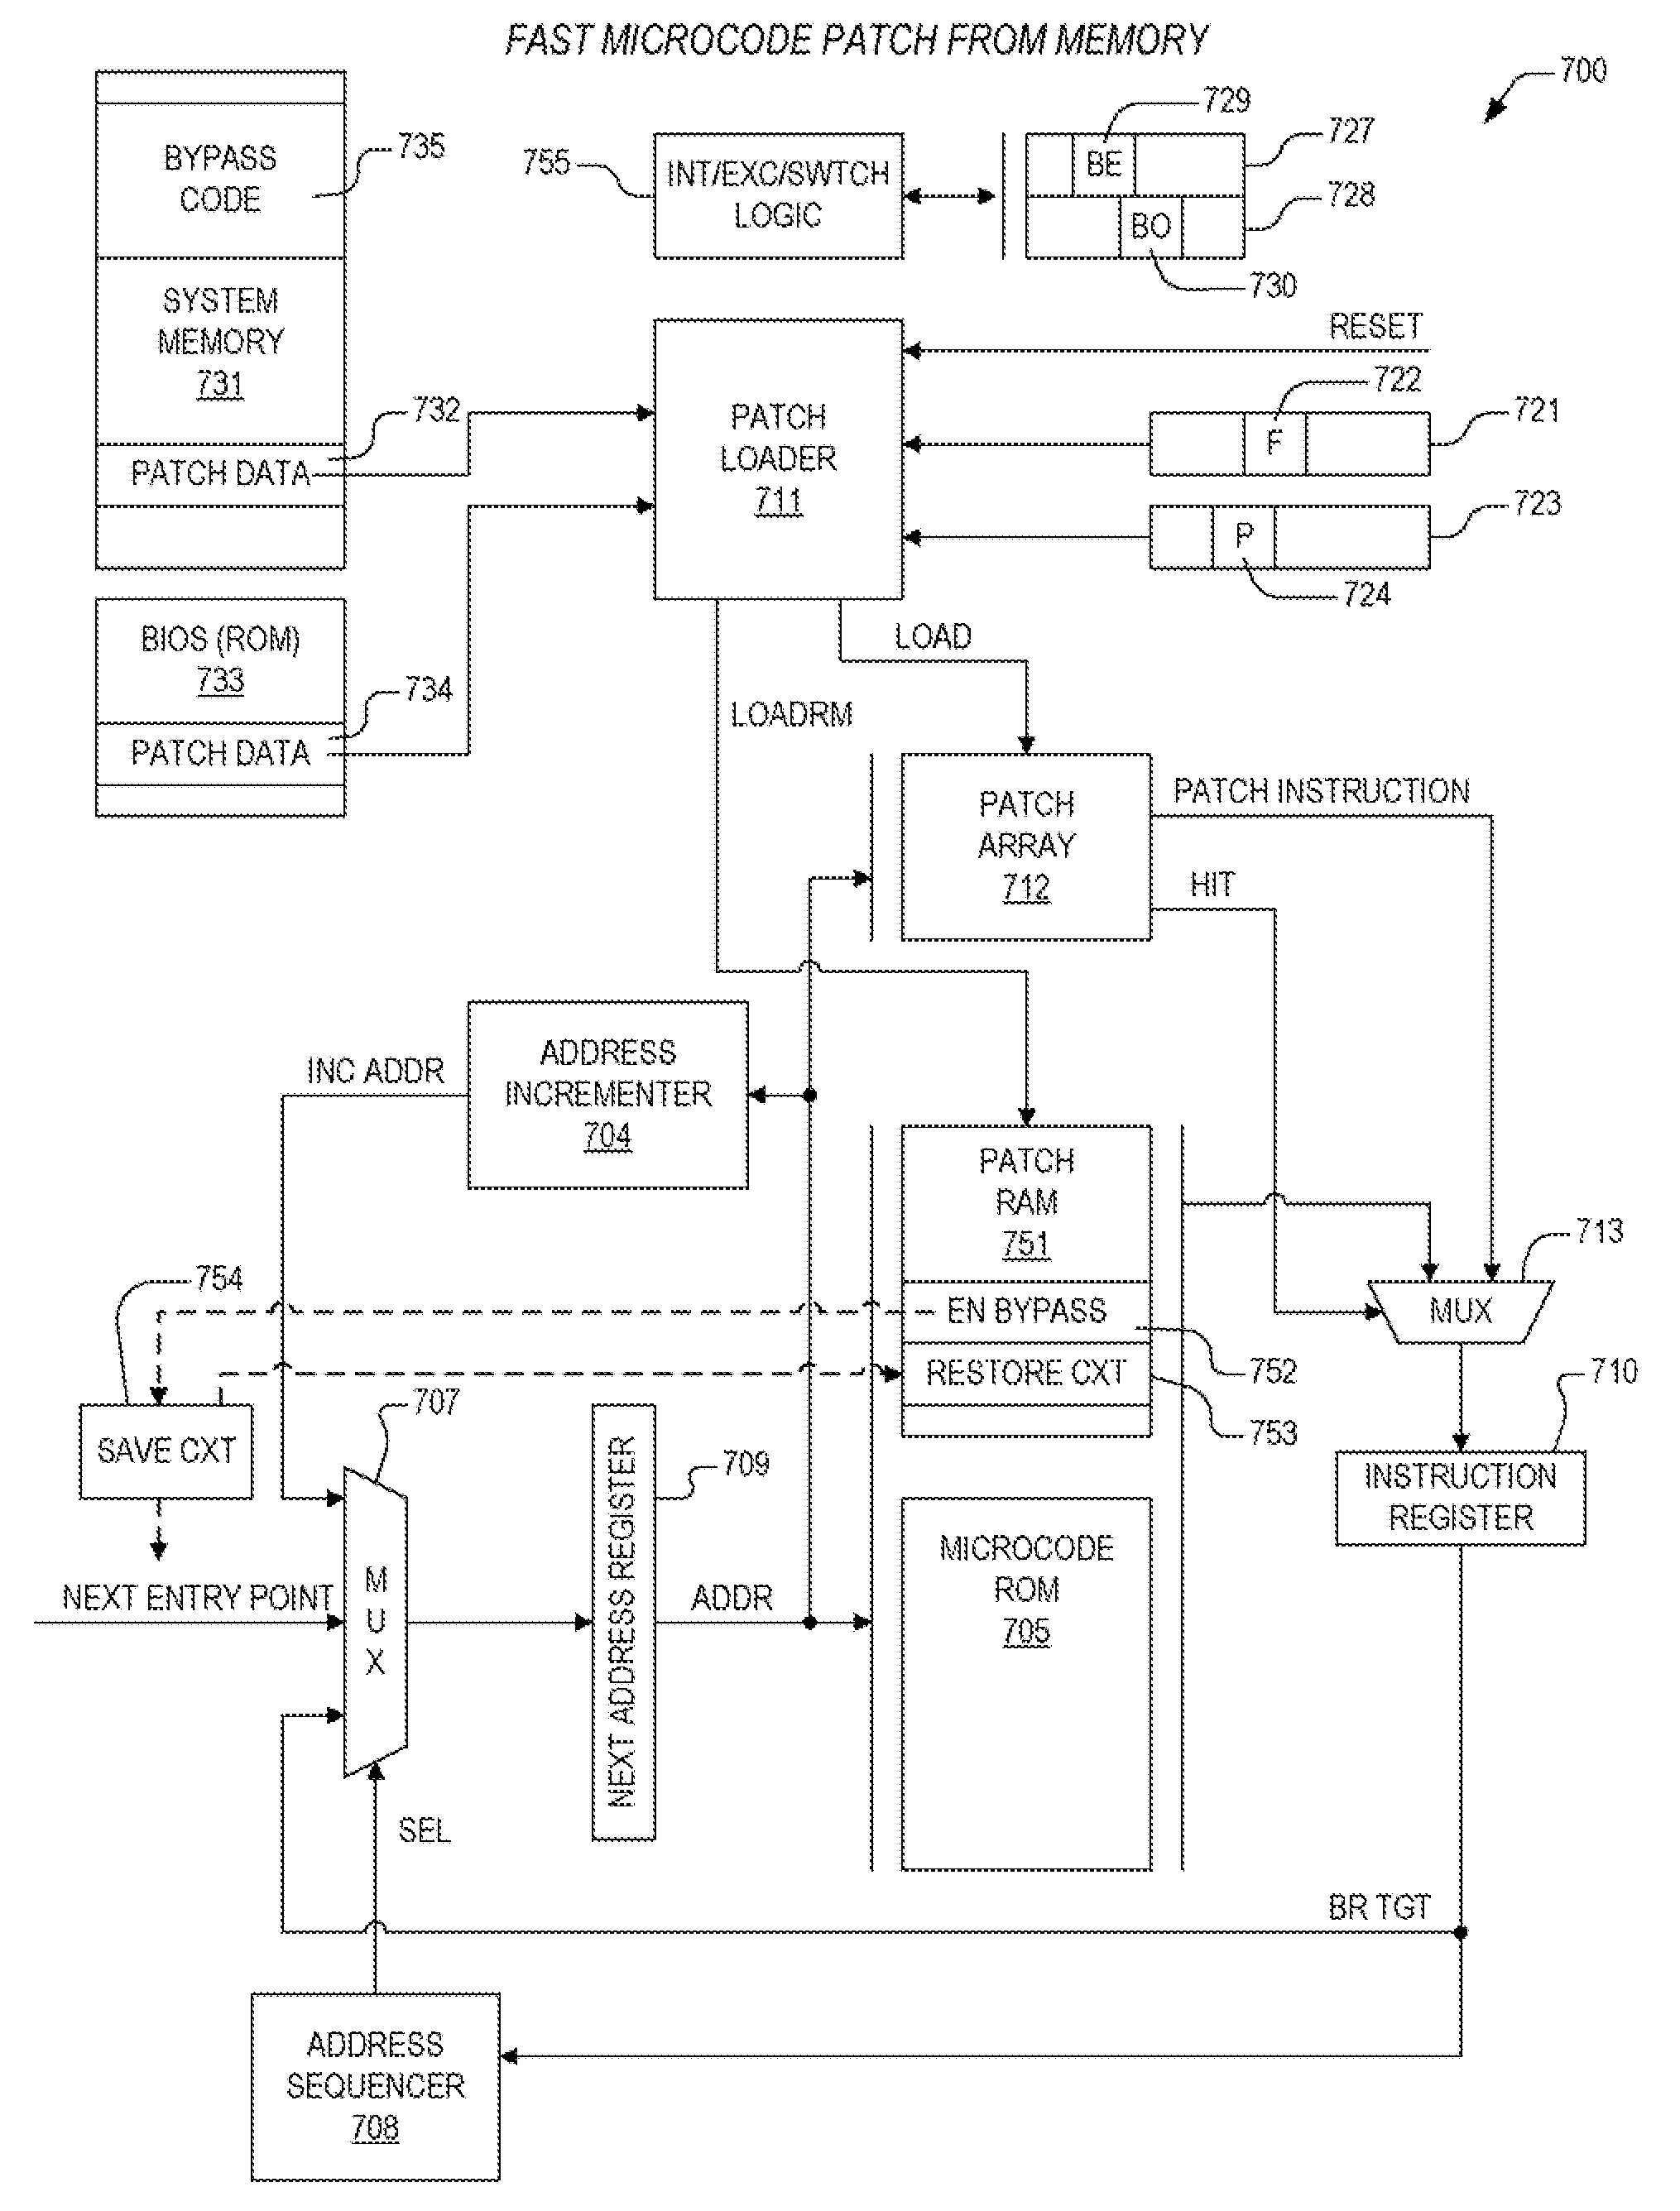 Apparatus and method for fast microcode patch from memory